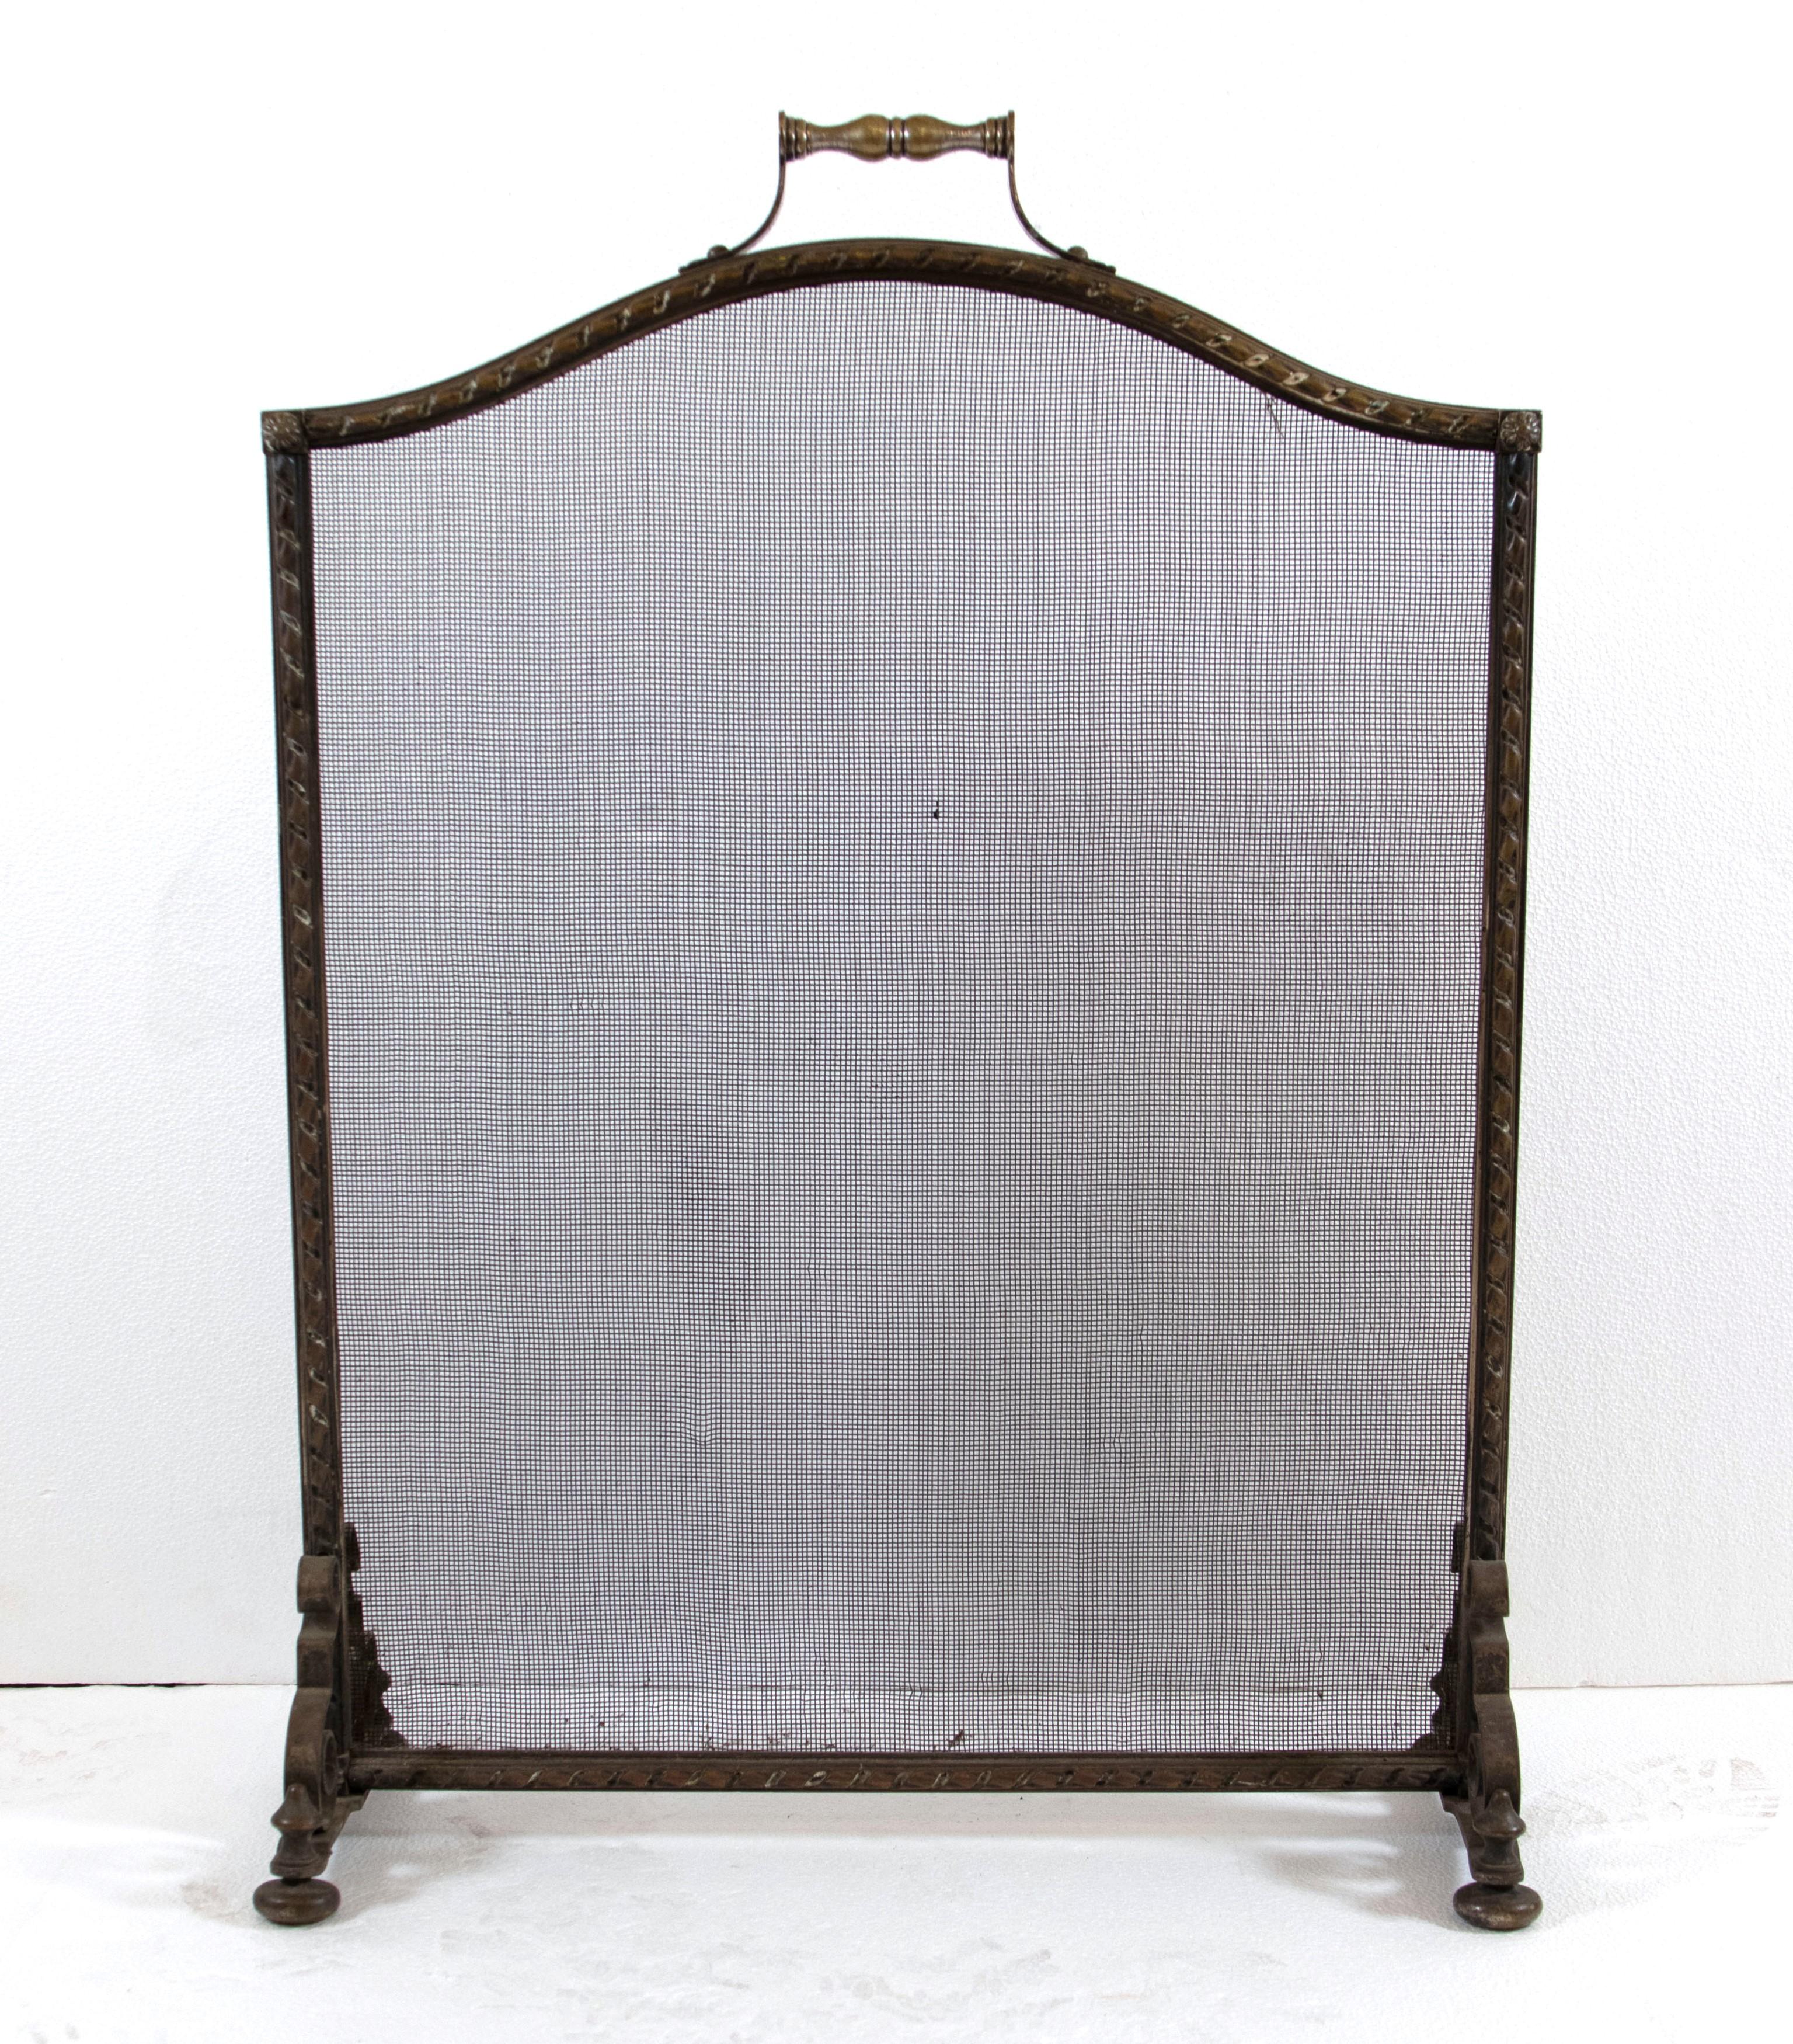 Antique bronze fireplace screen with a braid floral motif with curled steeple legs. Good condition with appropriate wear from age. One available. Please note, this item is located in one of our NYC locations.